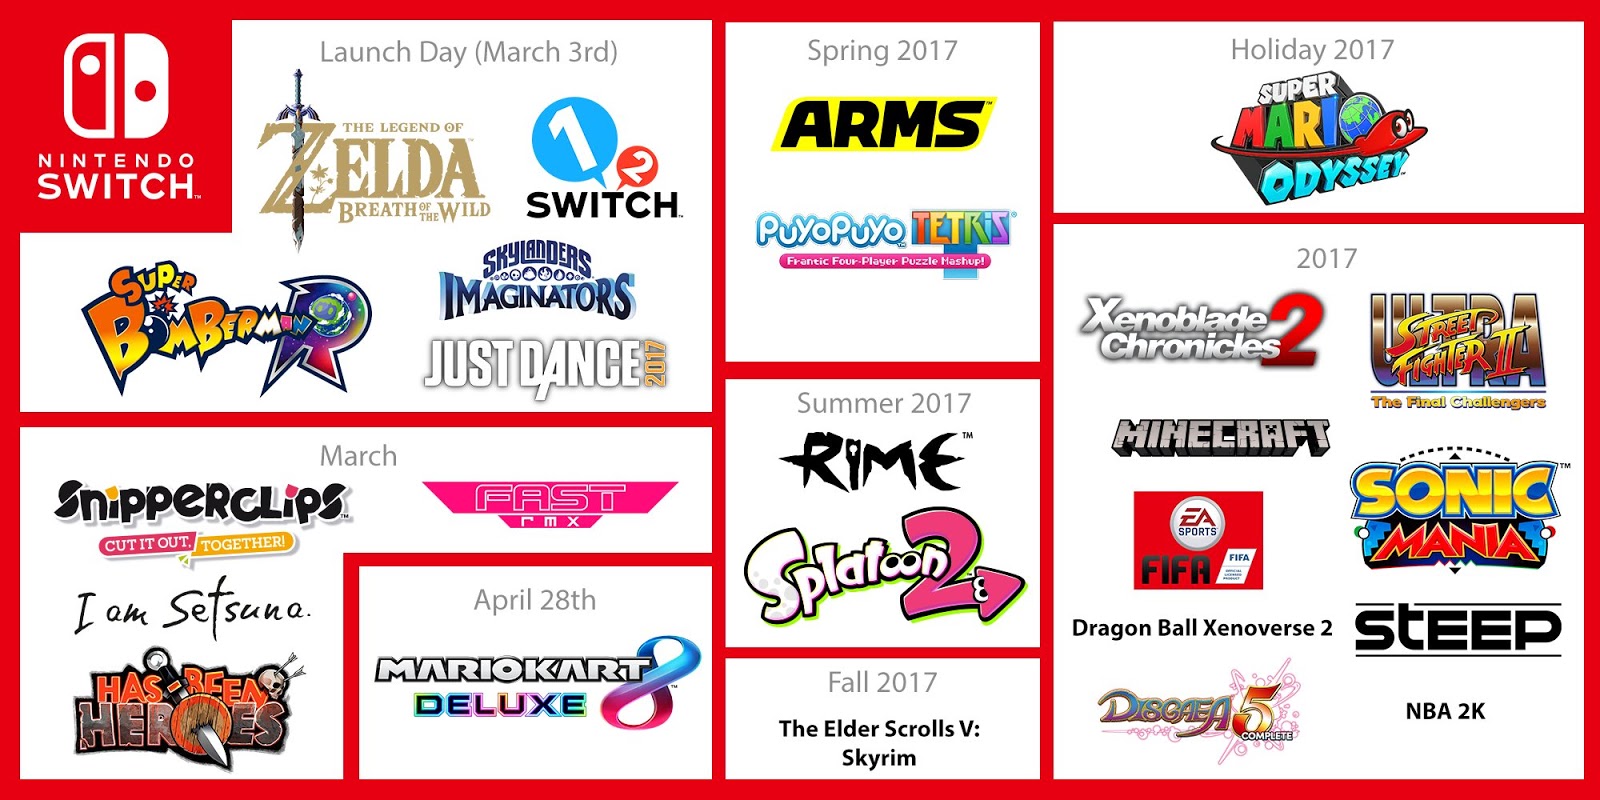 Hey, Nintendo Didn’t Delay Any Games This Year